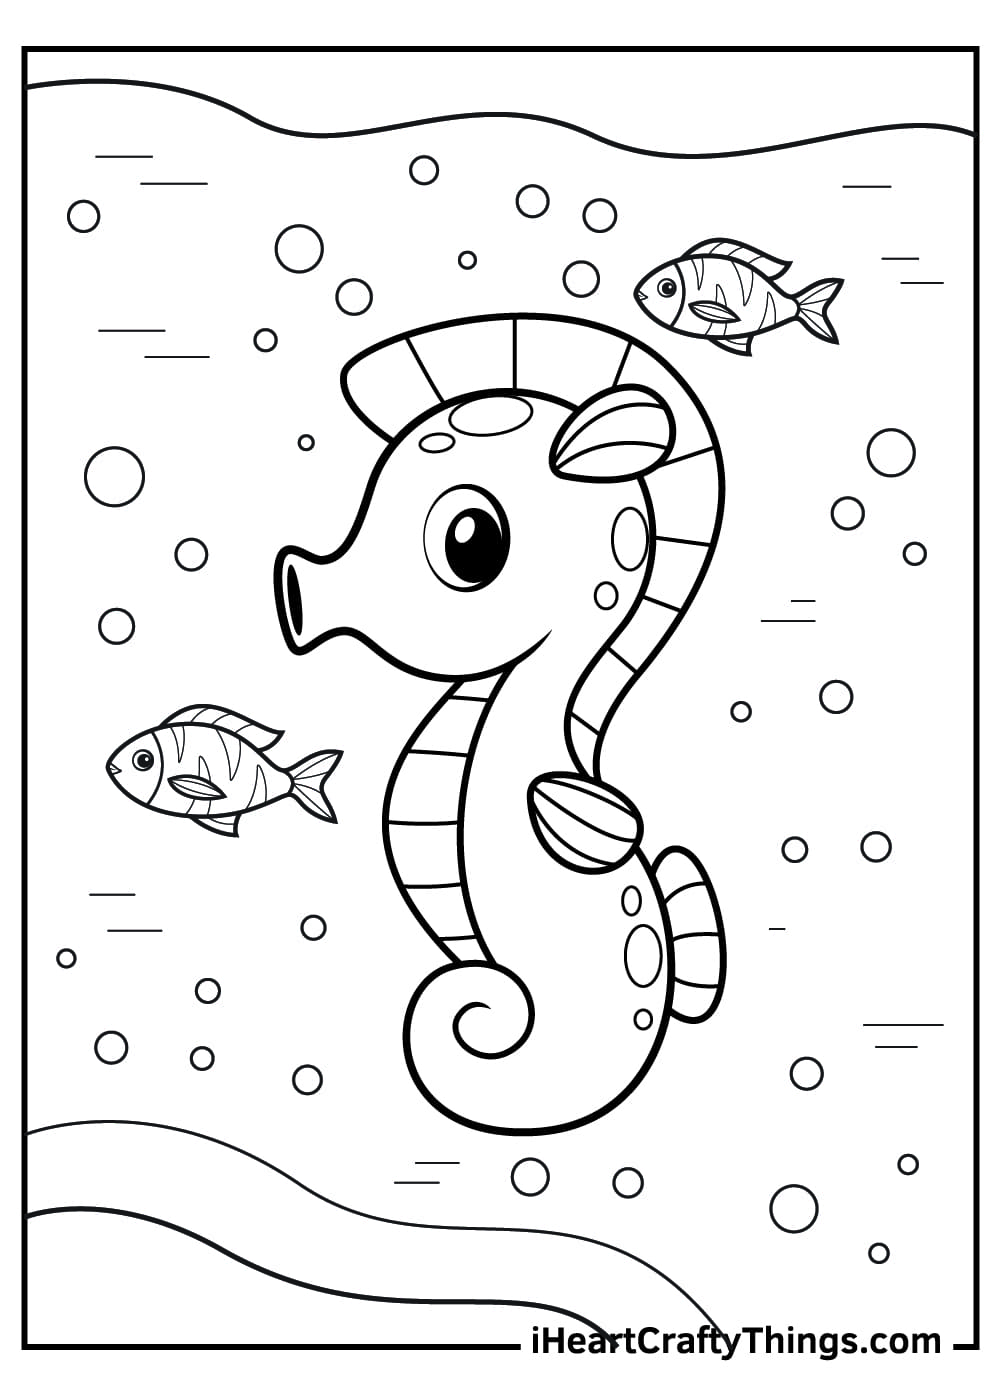 Seahorse Beautiful Image Coloring Page